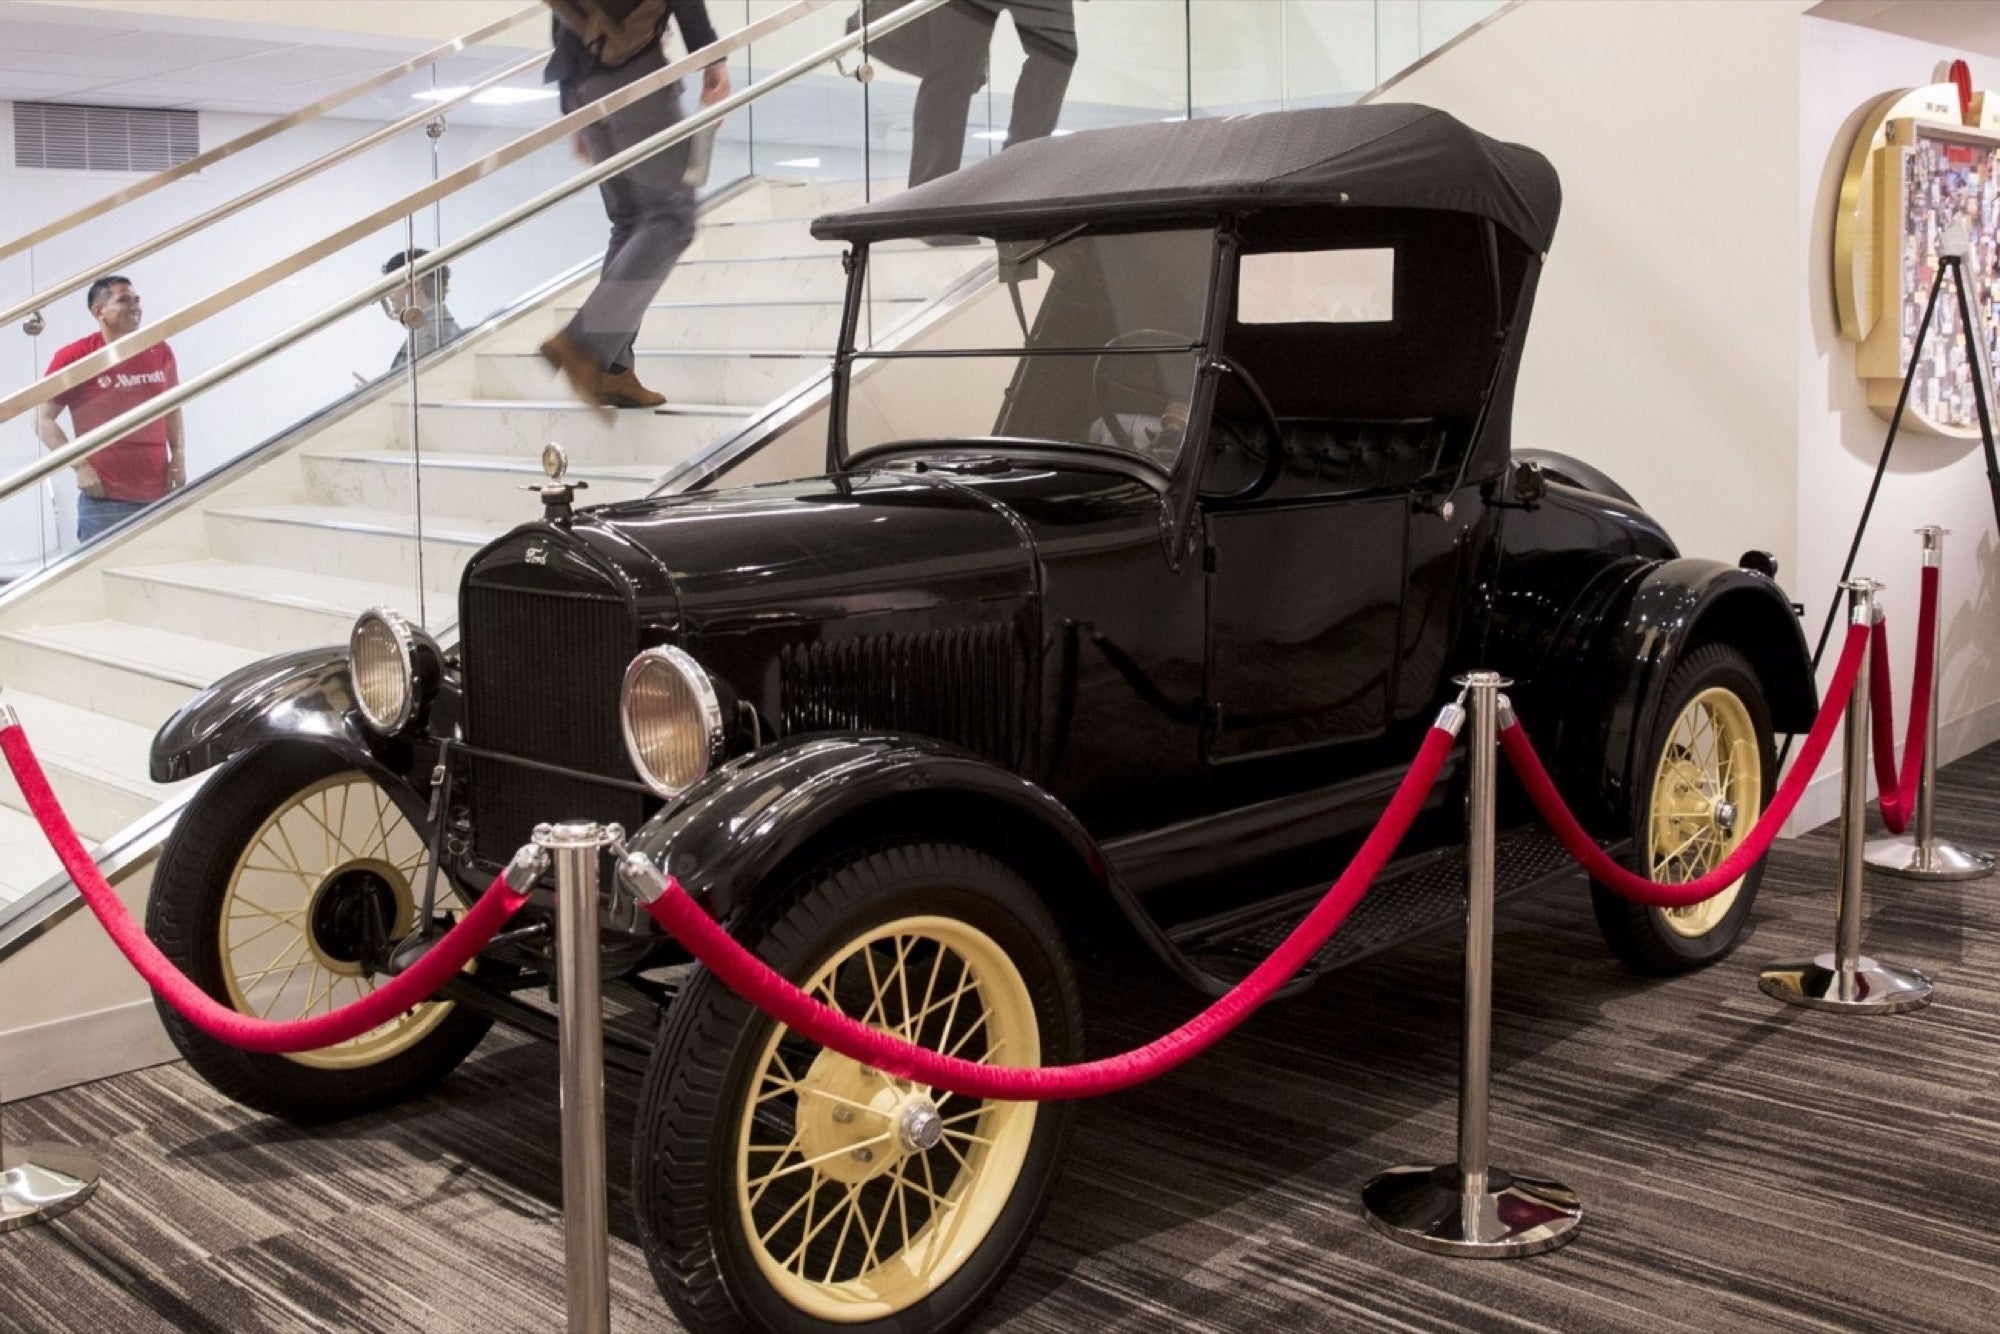 who invented the model t and how did henry ford design the model t